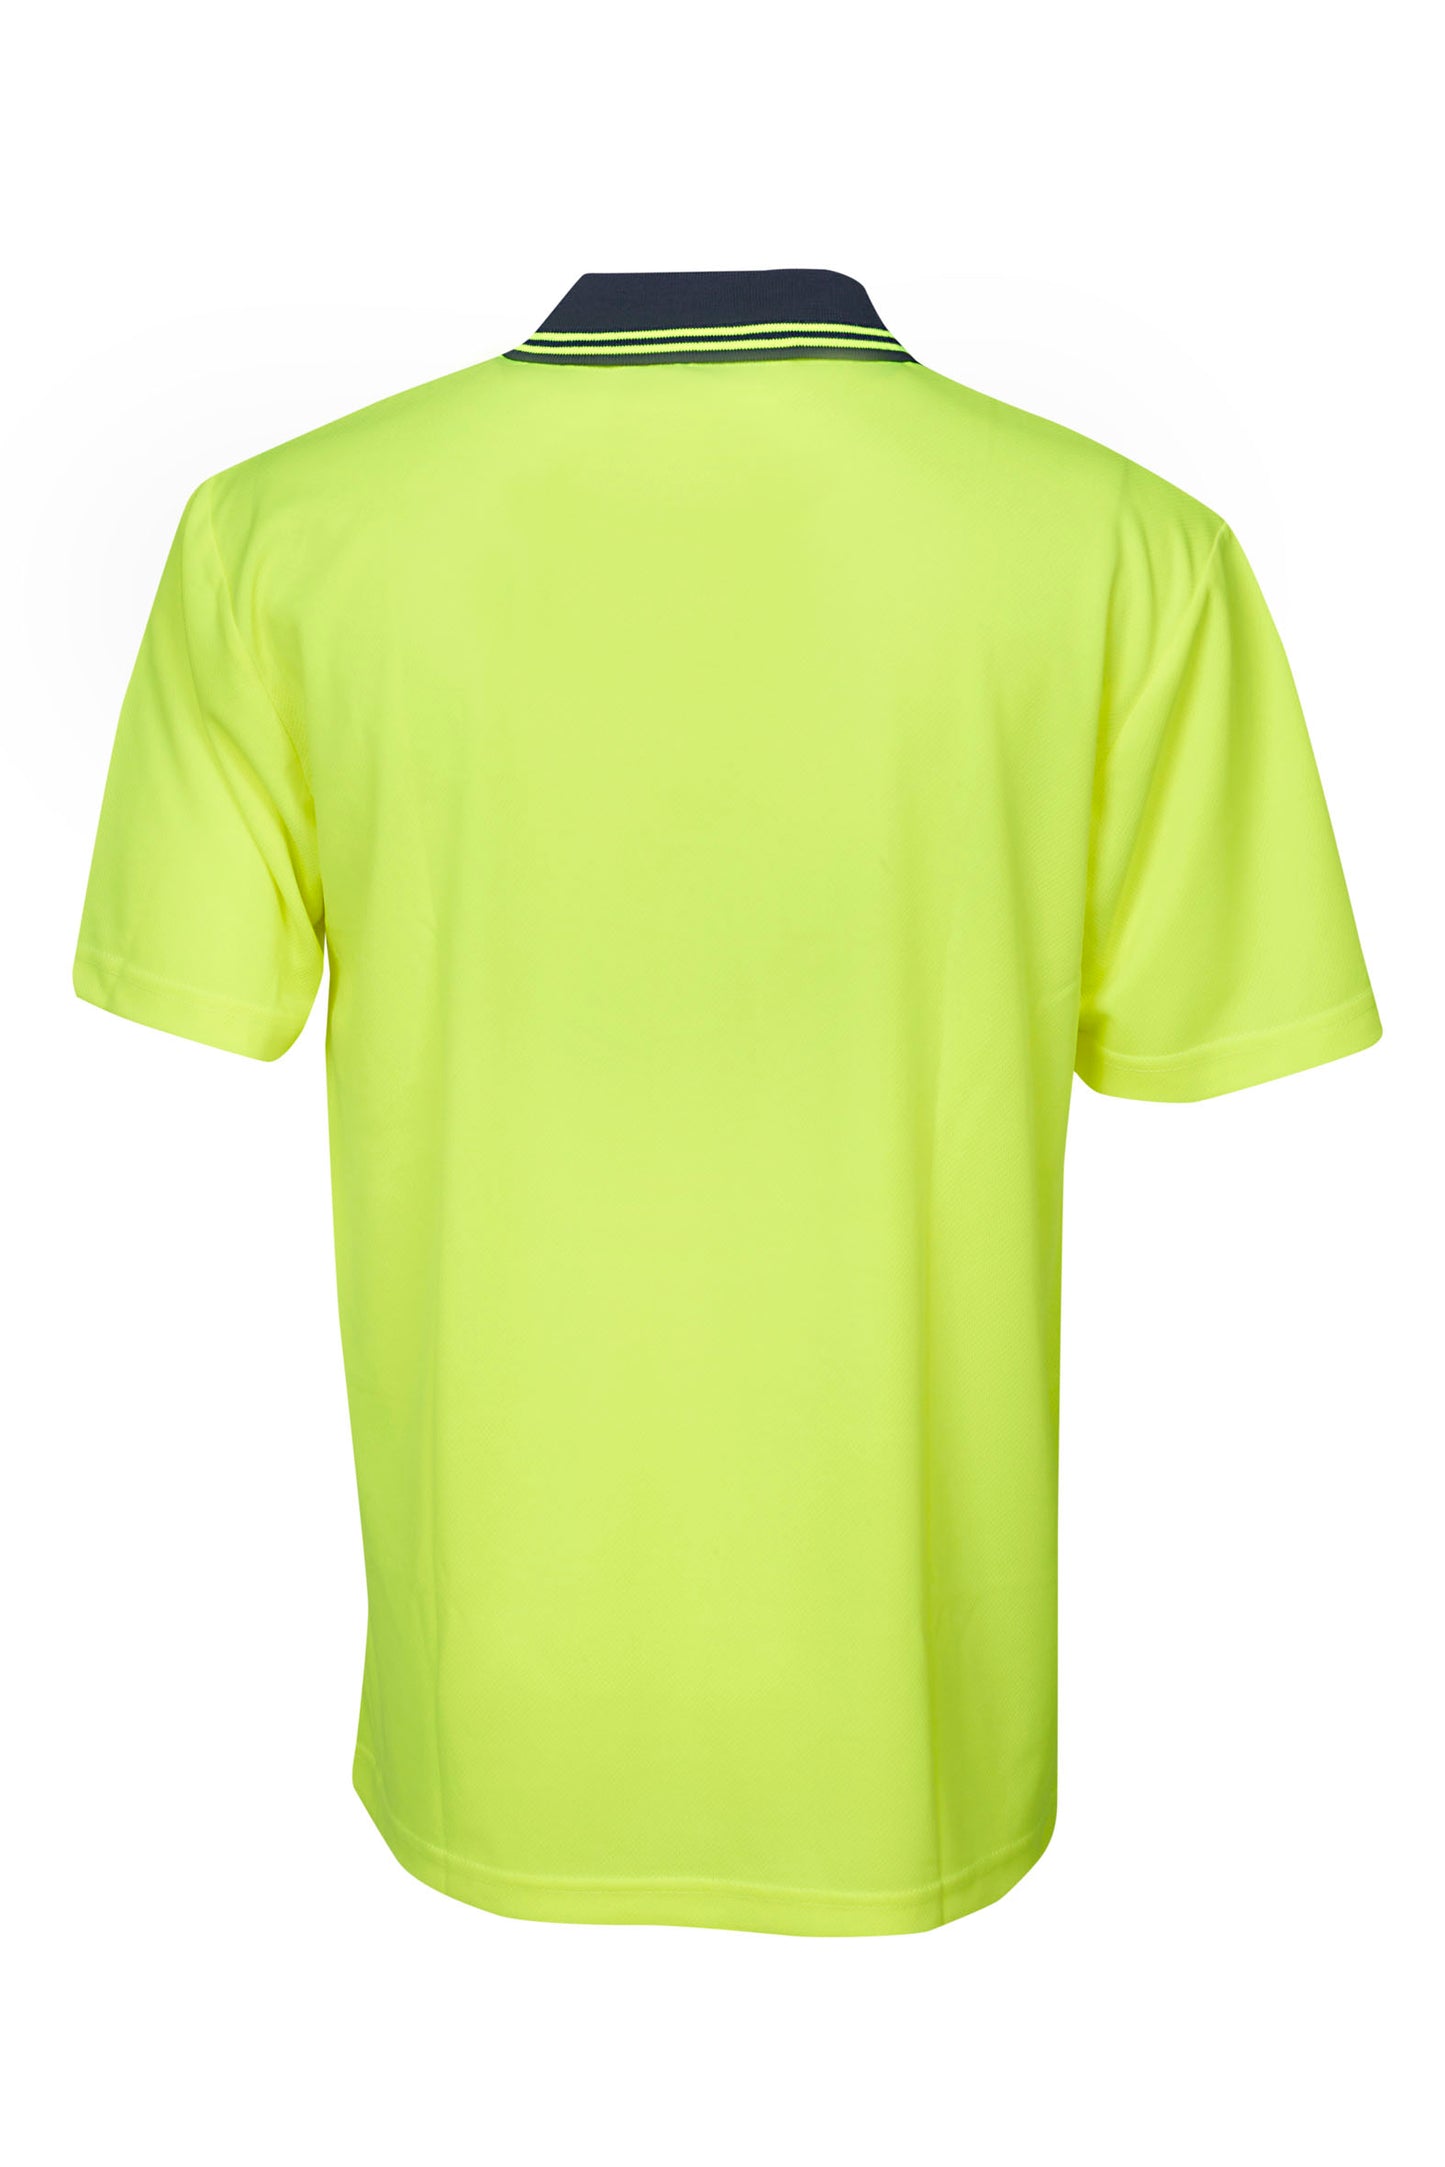 Blue Whale Hi Vis Light Weight Cooldry Polo Short Sleeve (BLUP62)